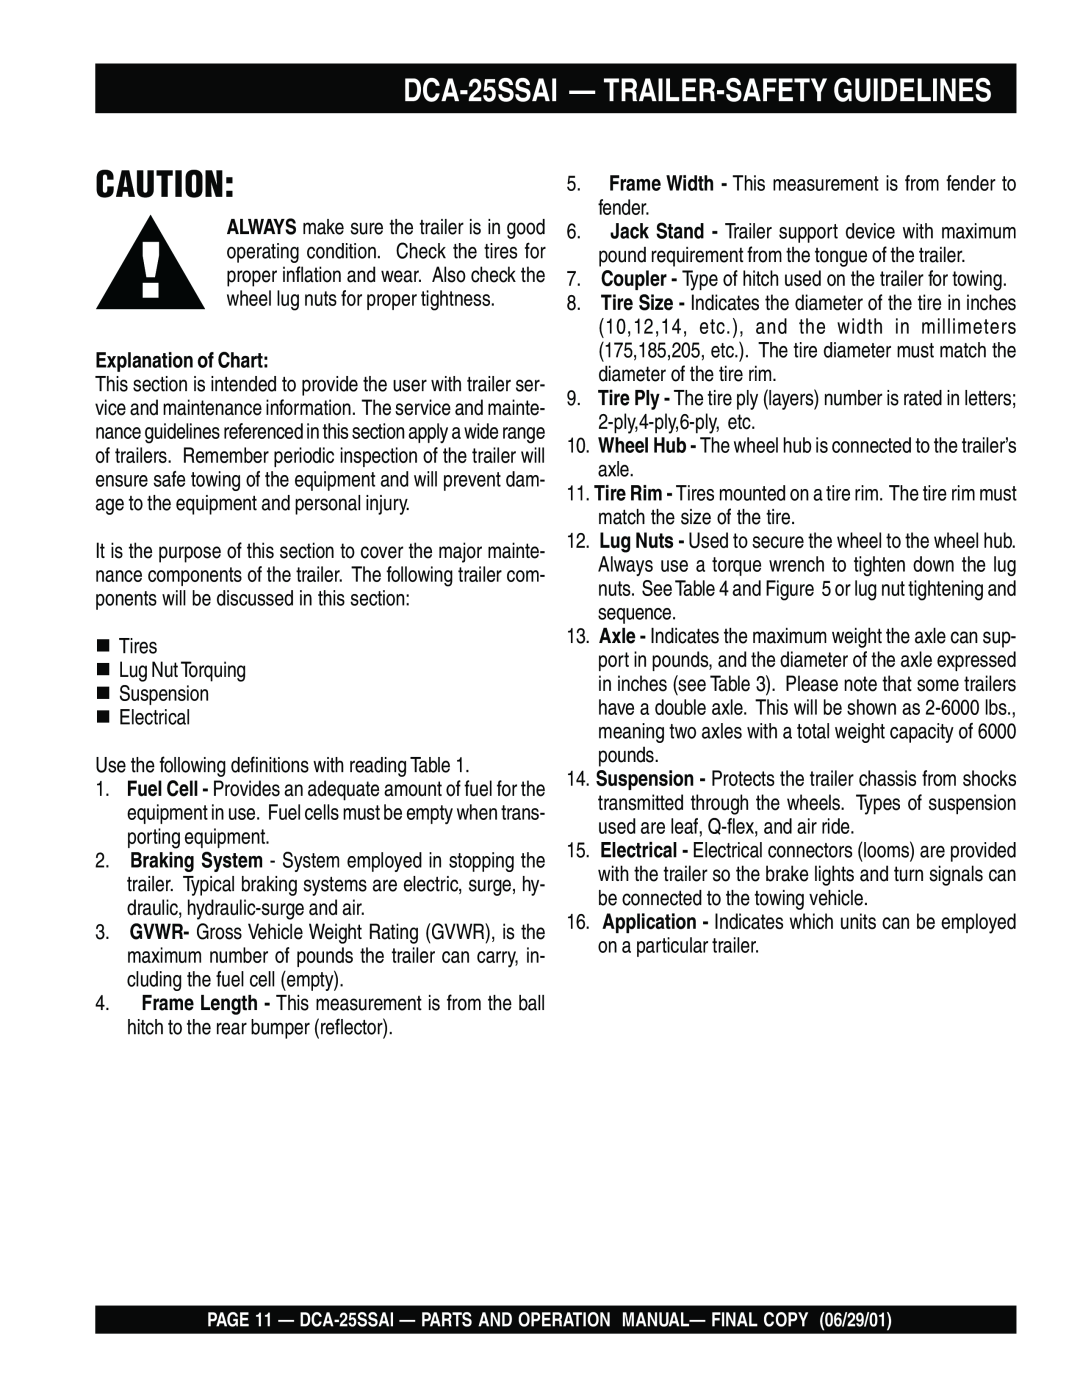 Multiquip operation manual DCA-25SSAI - TRAILER-SAFETY GUIDELINES, Explanation of Chart 